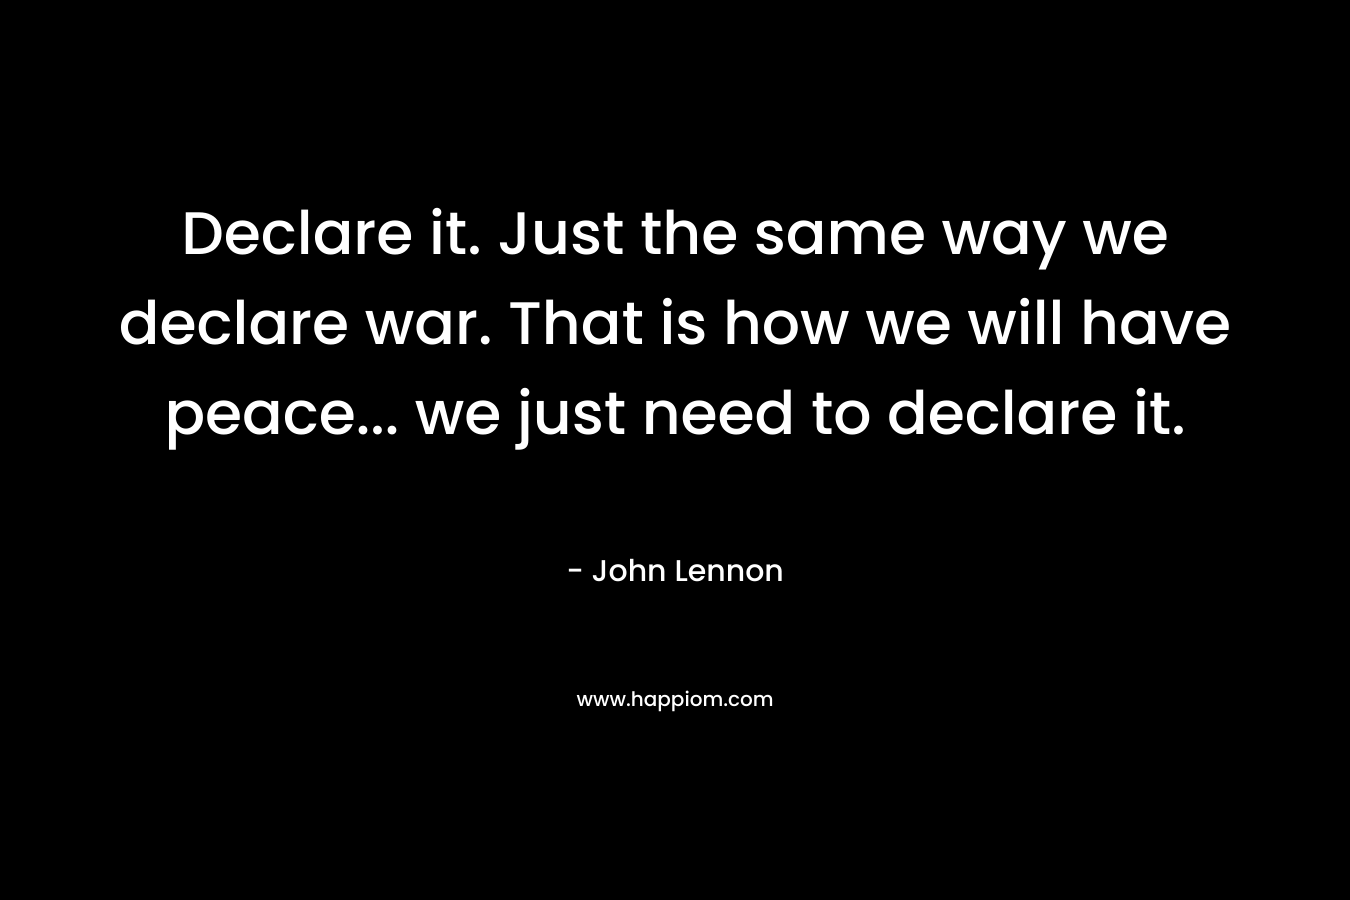 Declare it. Just the same way we declare war. That is how we will have peace... we just need to declare it.